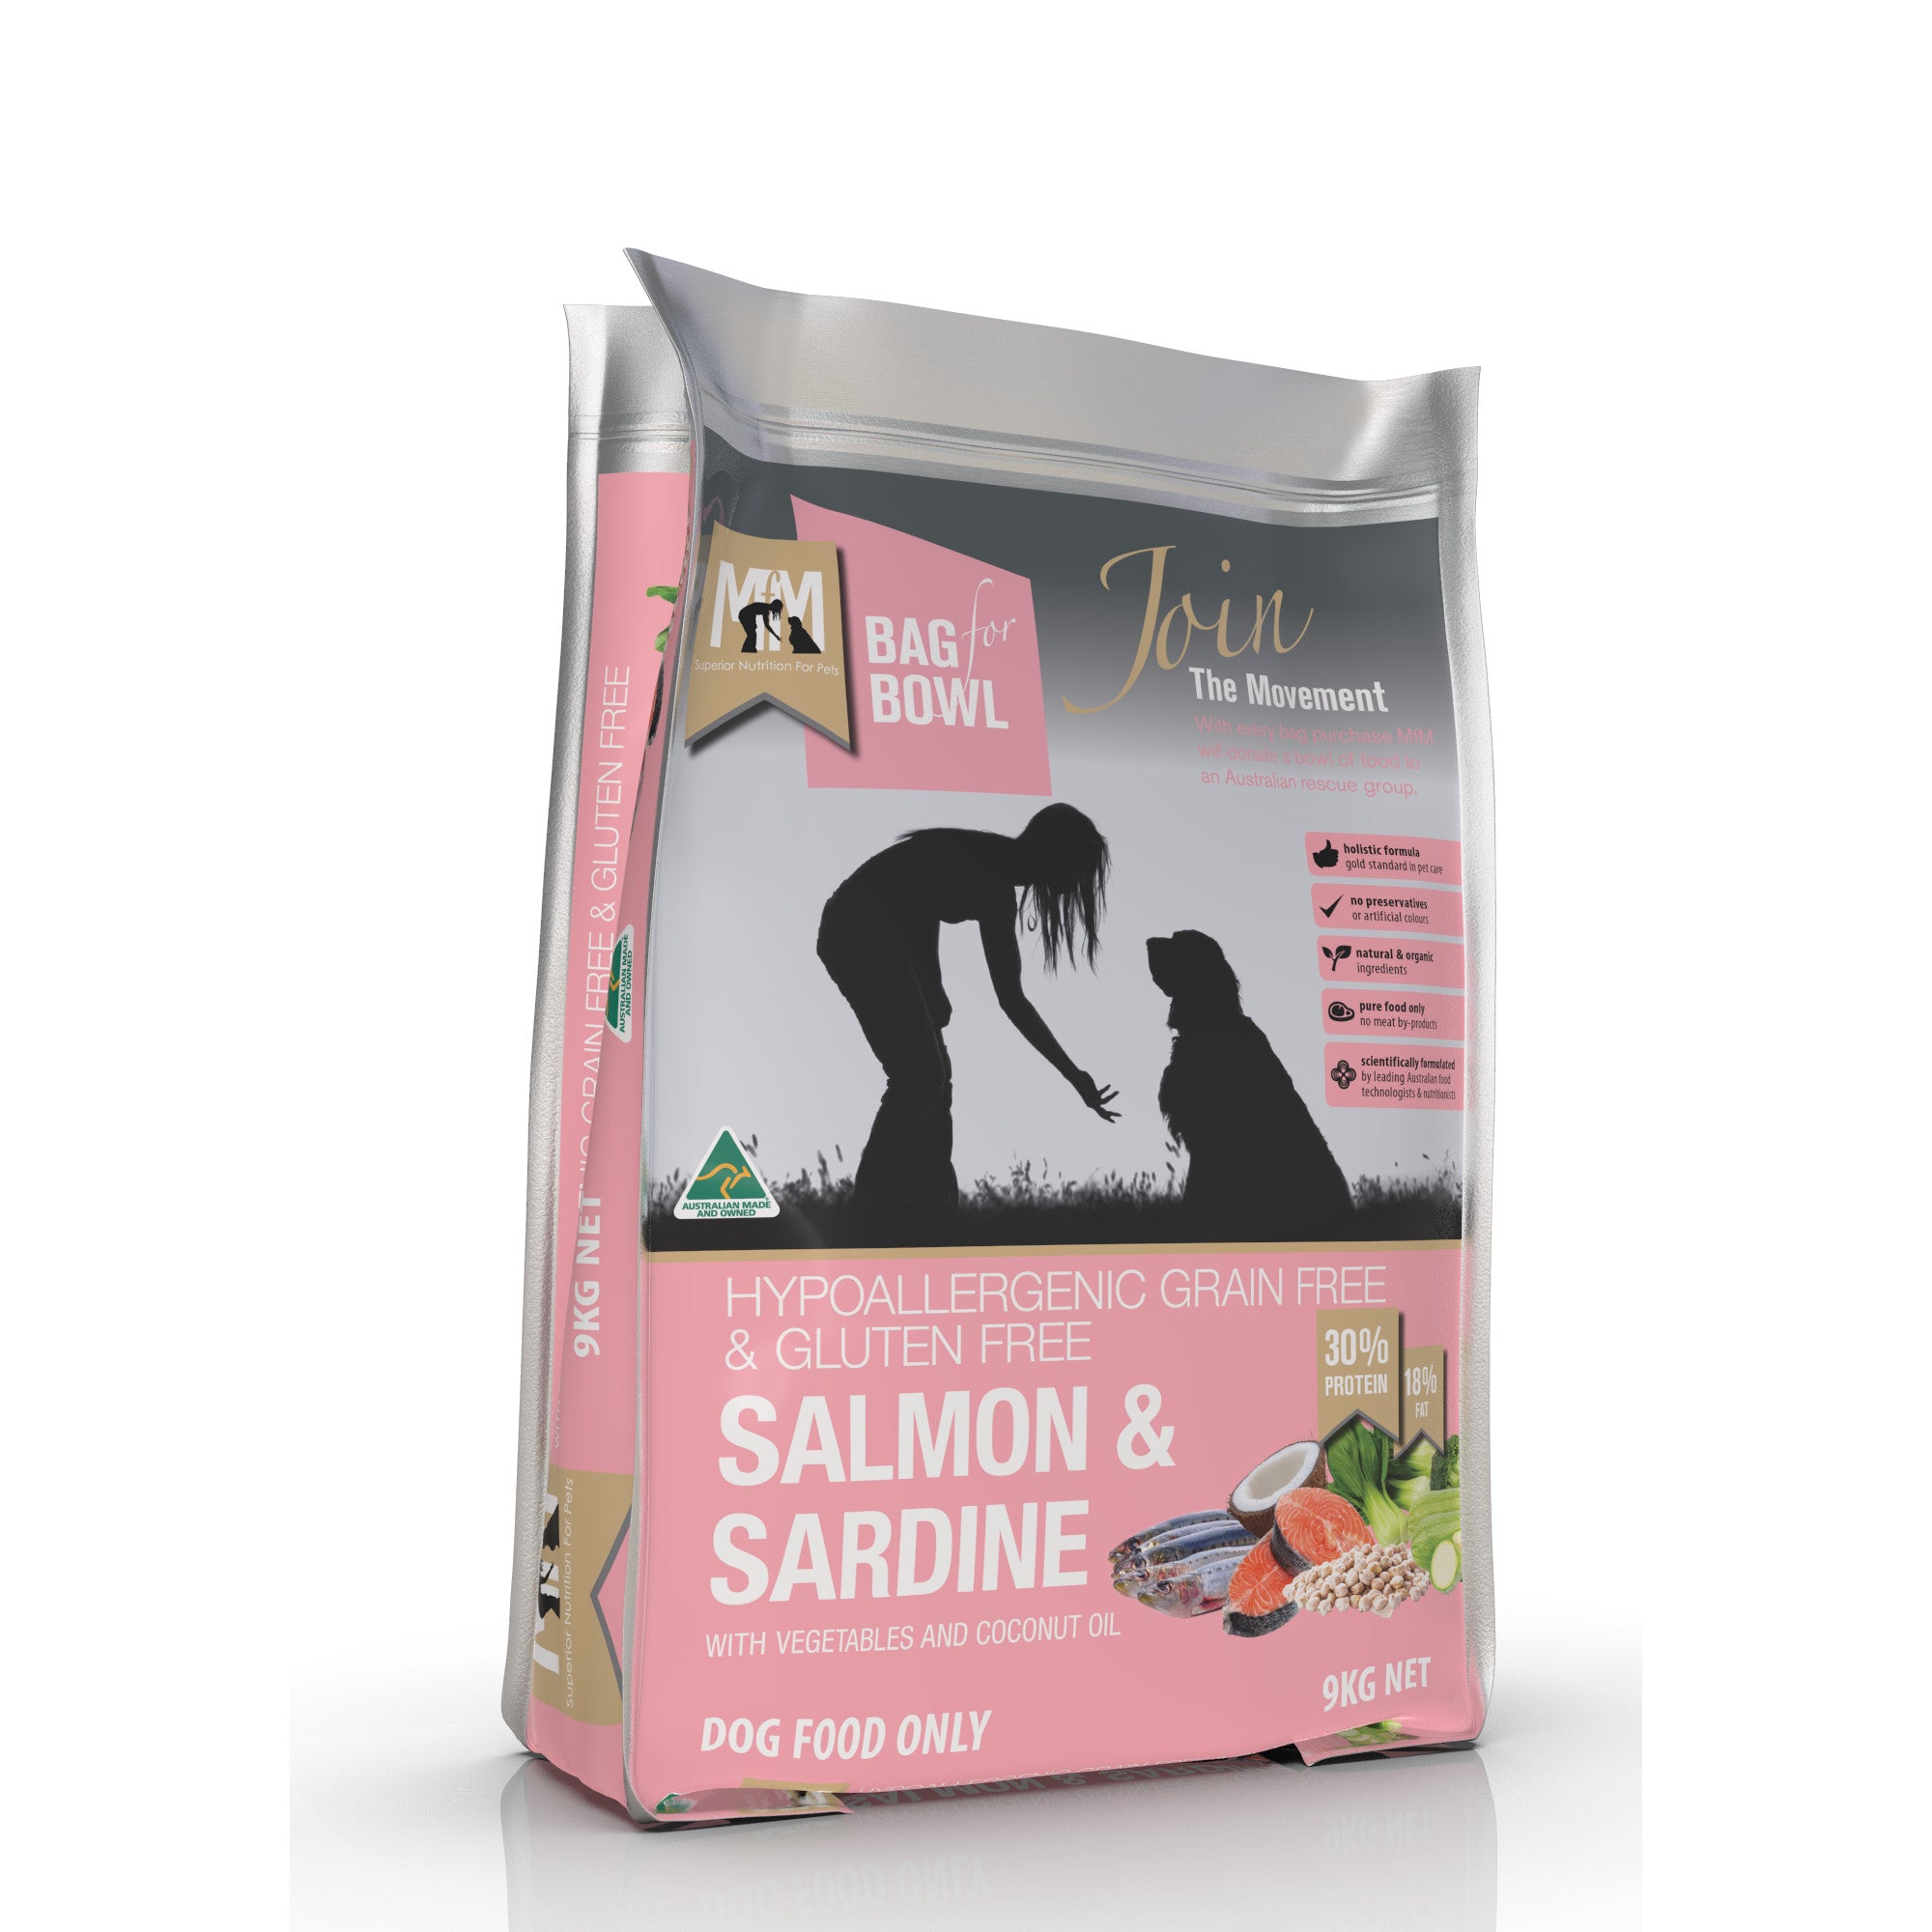 Meals for Mutts Grain Free Salmon and Sardine Dog Food 9kg.